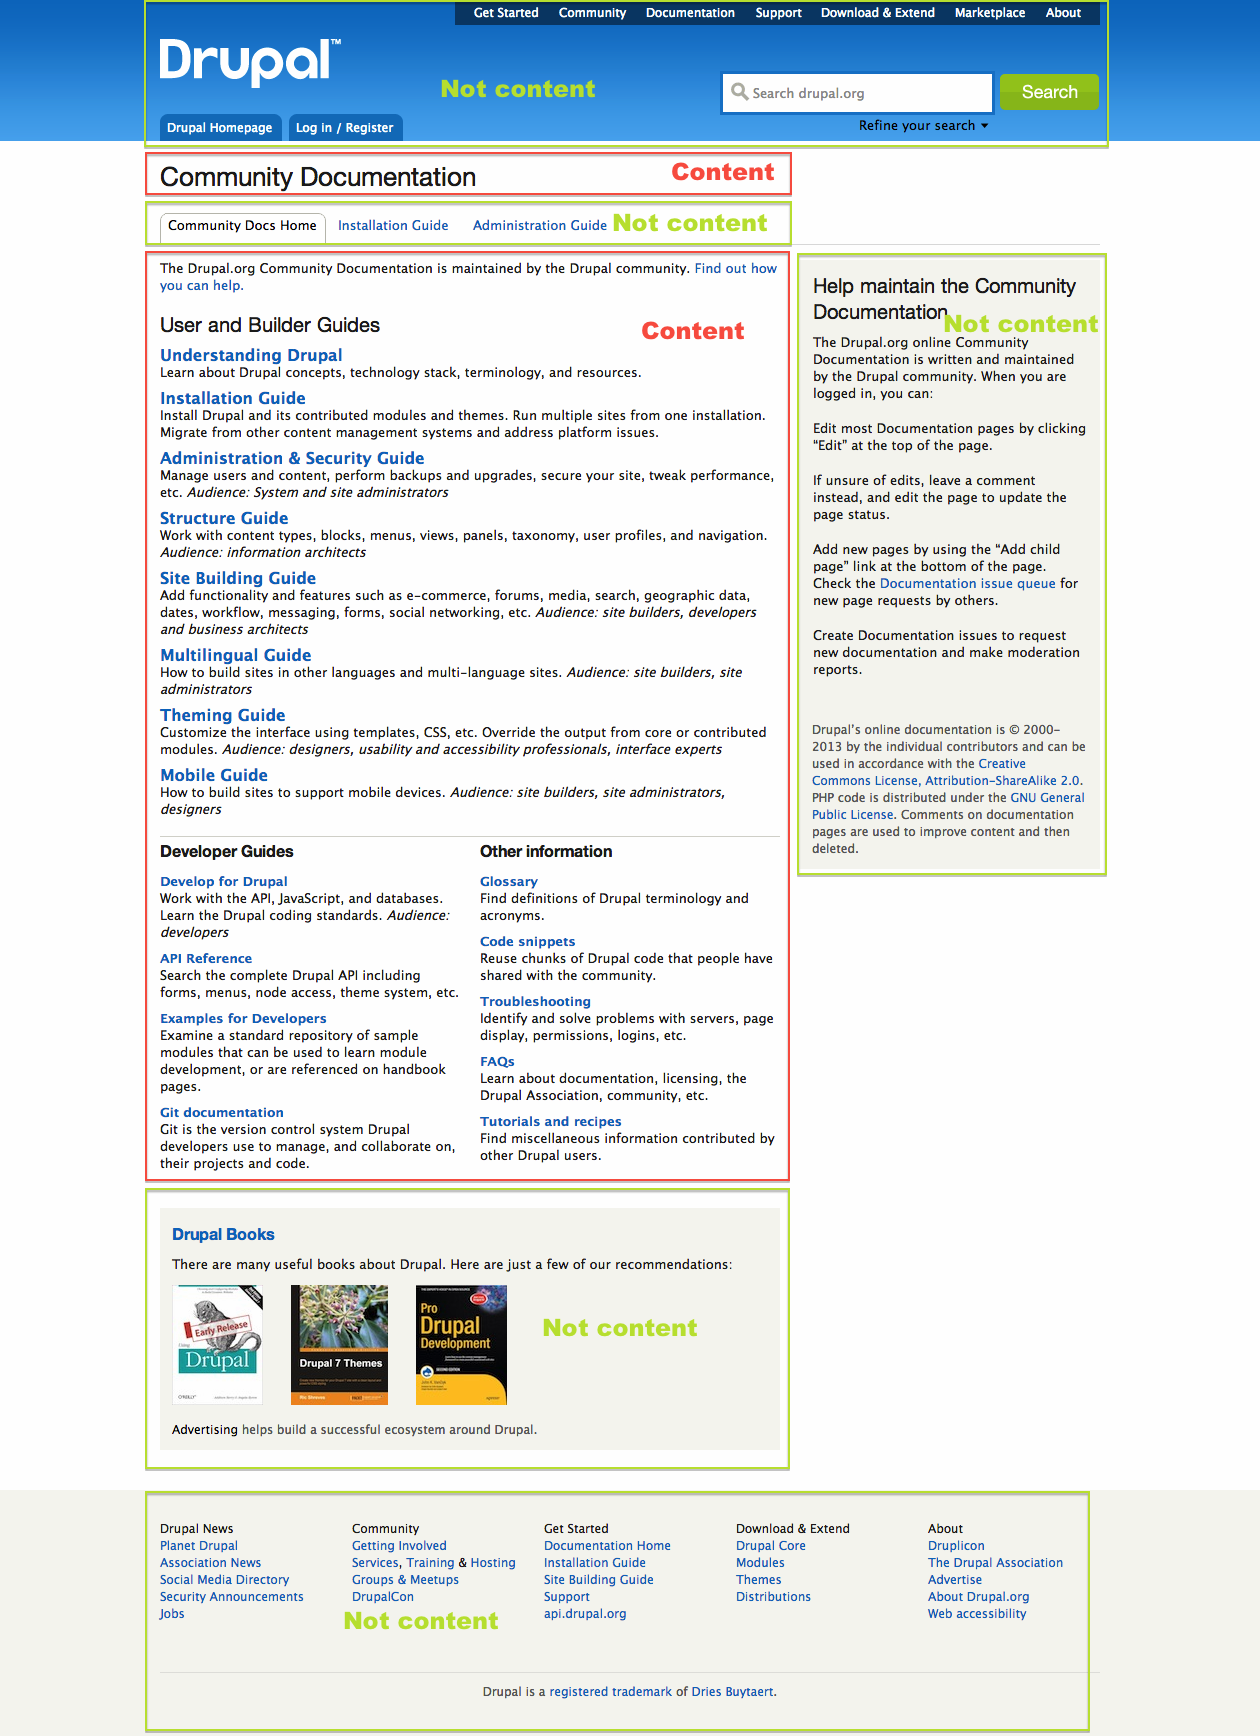 The documentation page on Drupal.org, showing that the header, sidebars, footers, tabs and menus are not content.